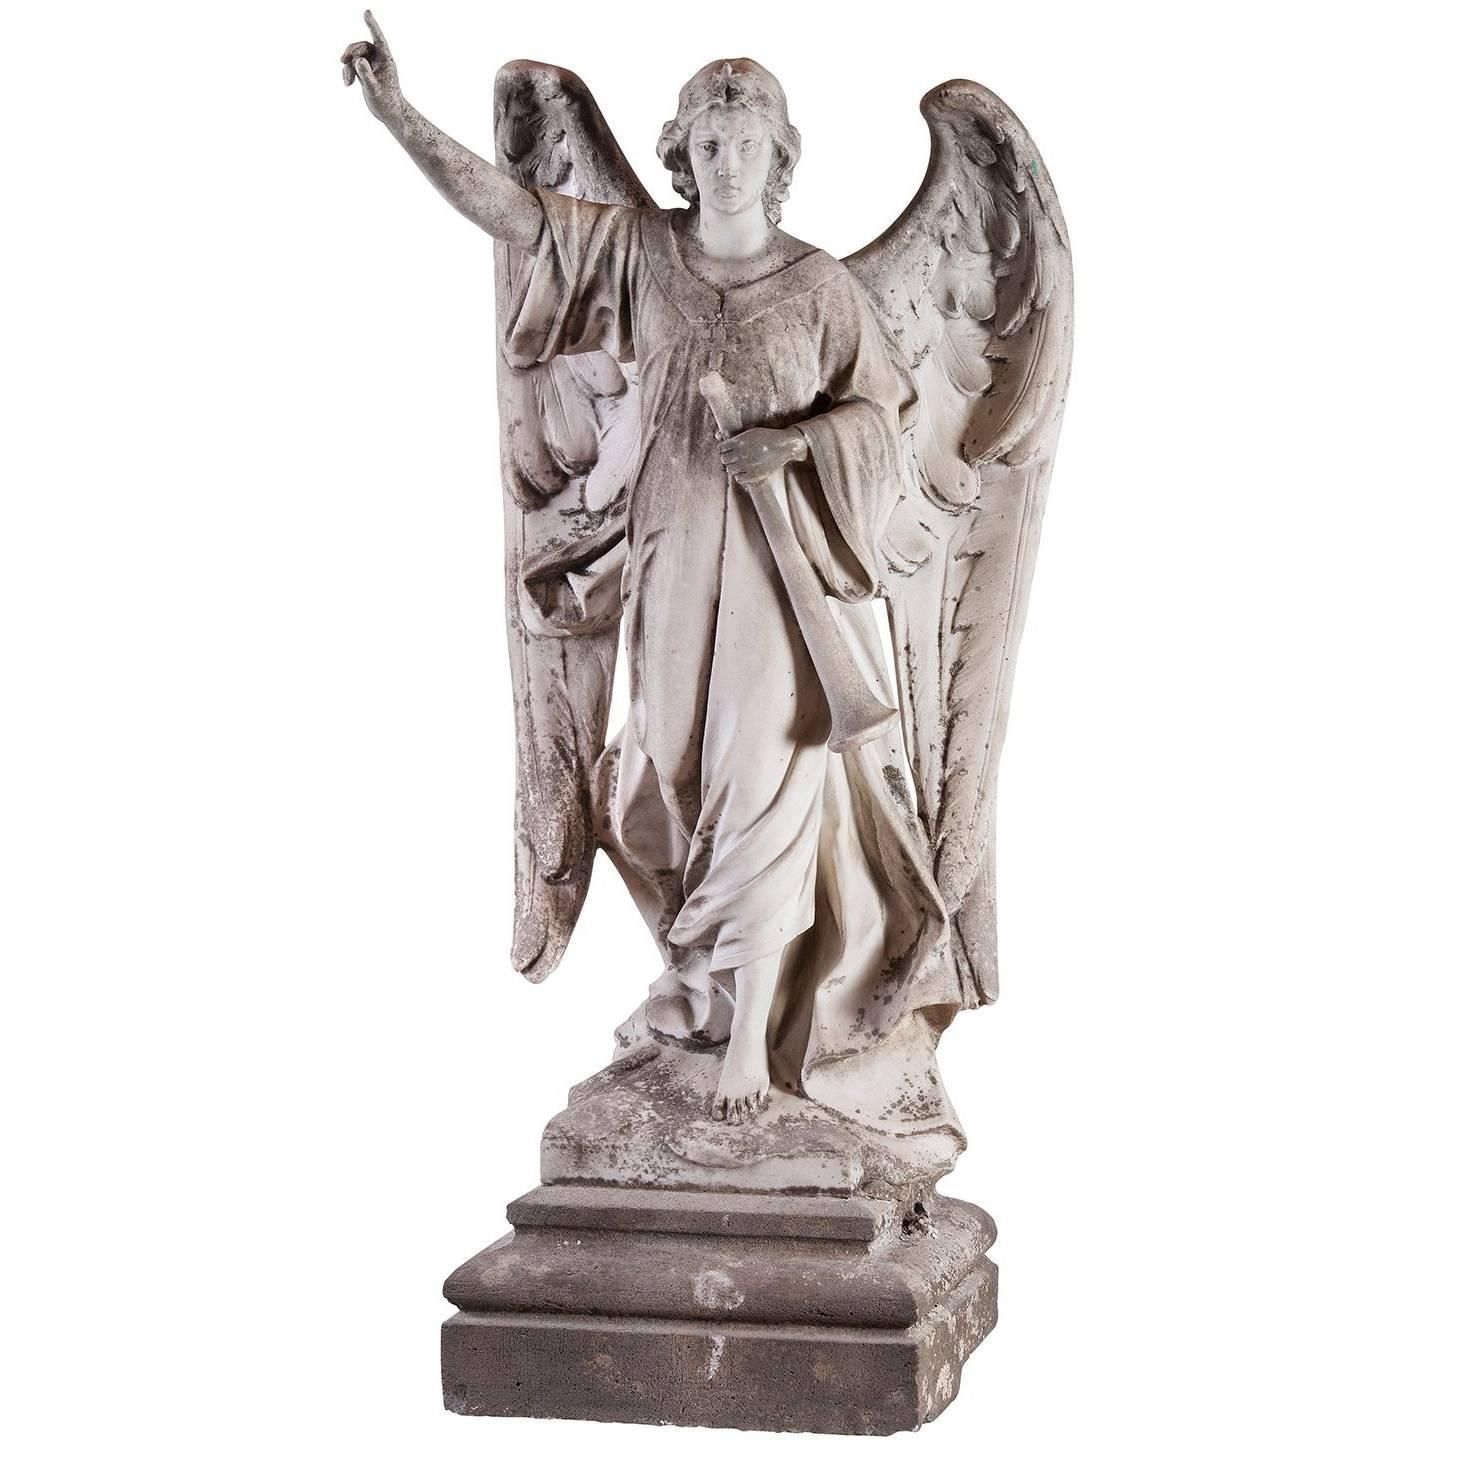 Angel, 19th Century Sculpture Marble For Sale at 1stdibs